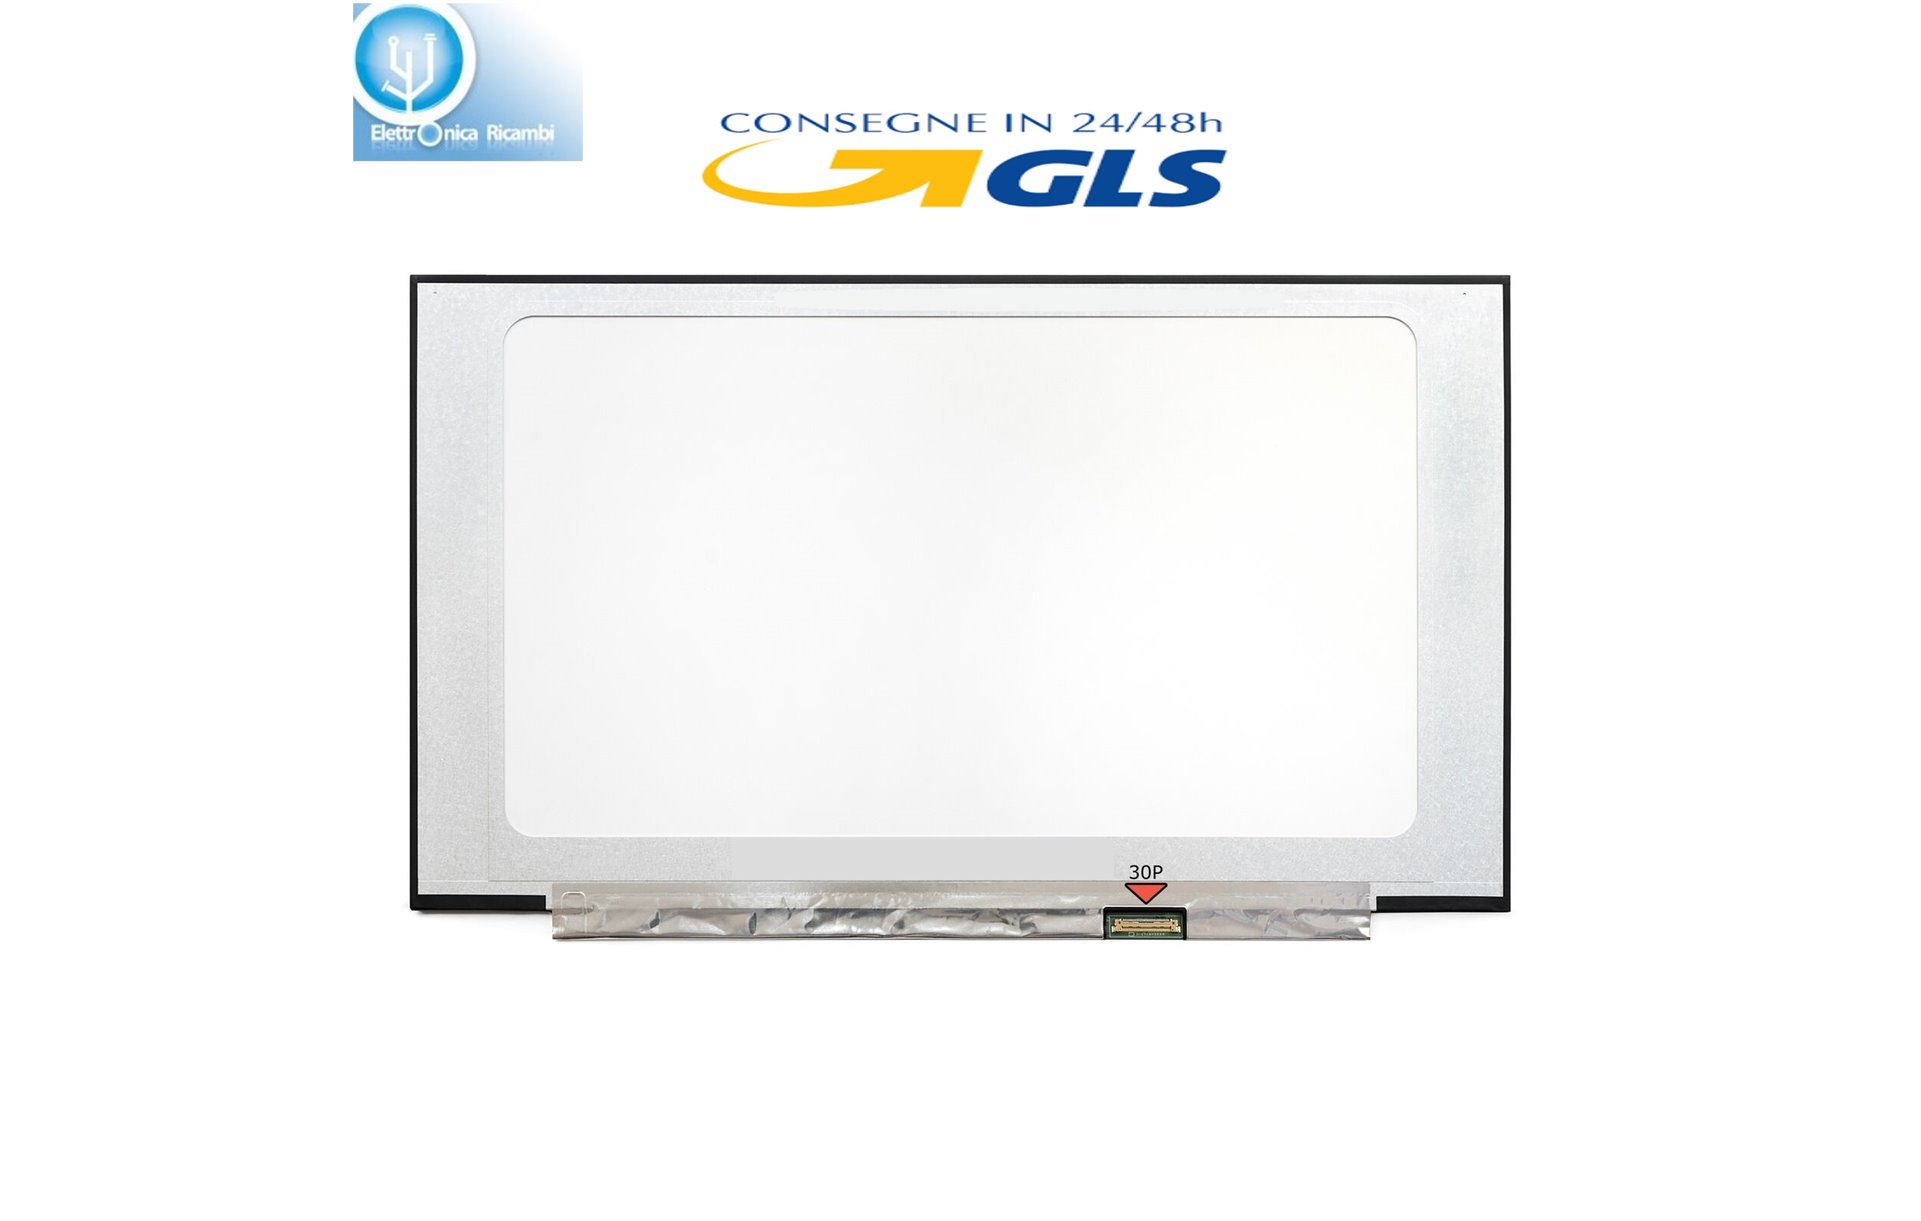 DISPLAY LCD Dell LATITUDE P95F001 SERIES 15.6 WideScreen (13.6"x7.6")  LED 30 pin IPS